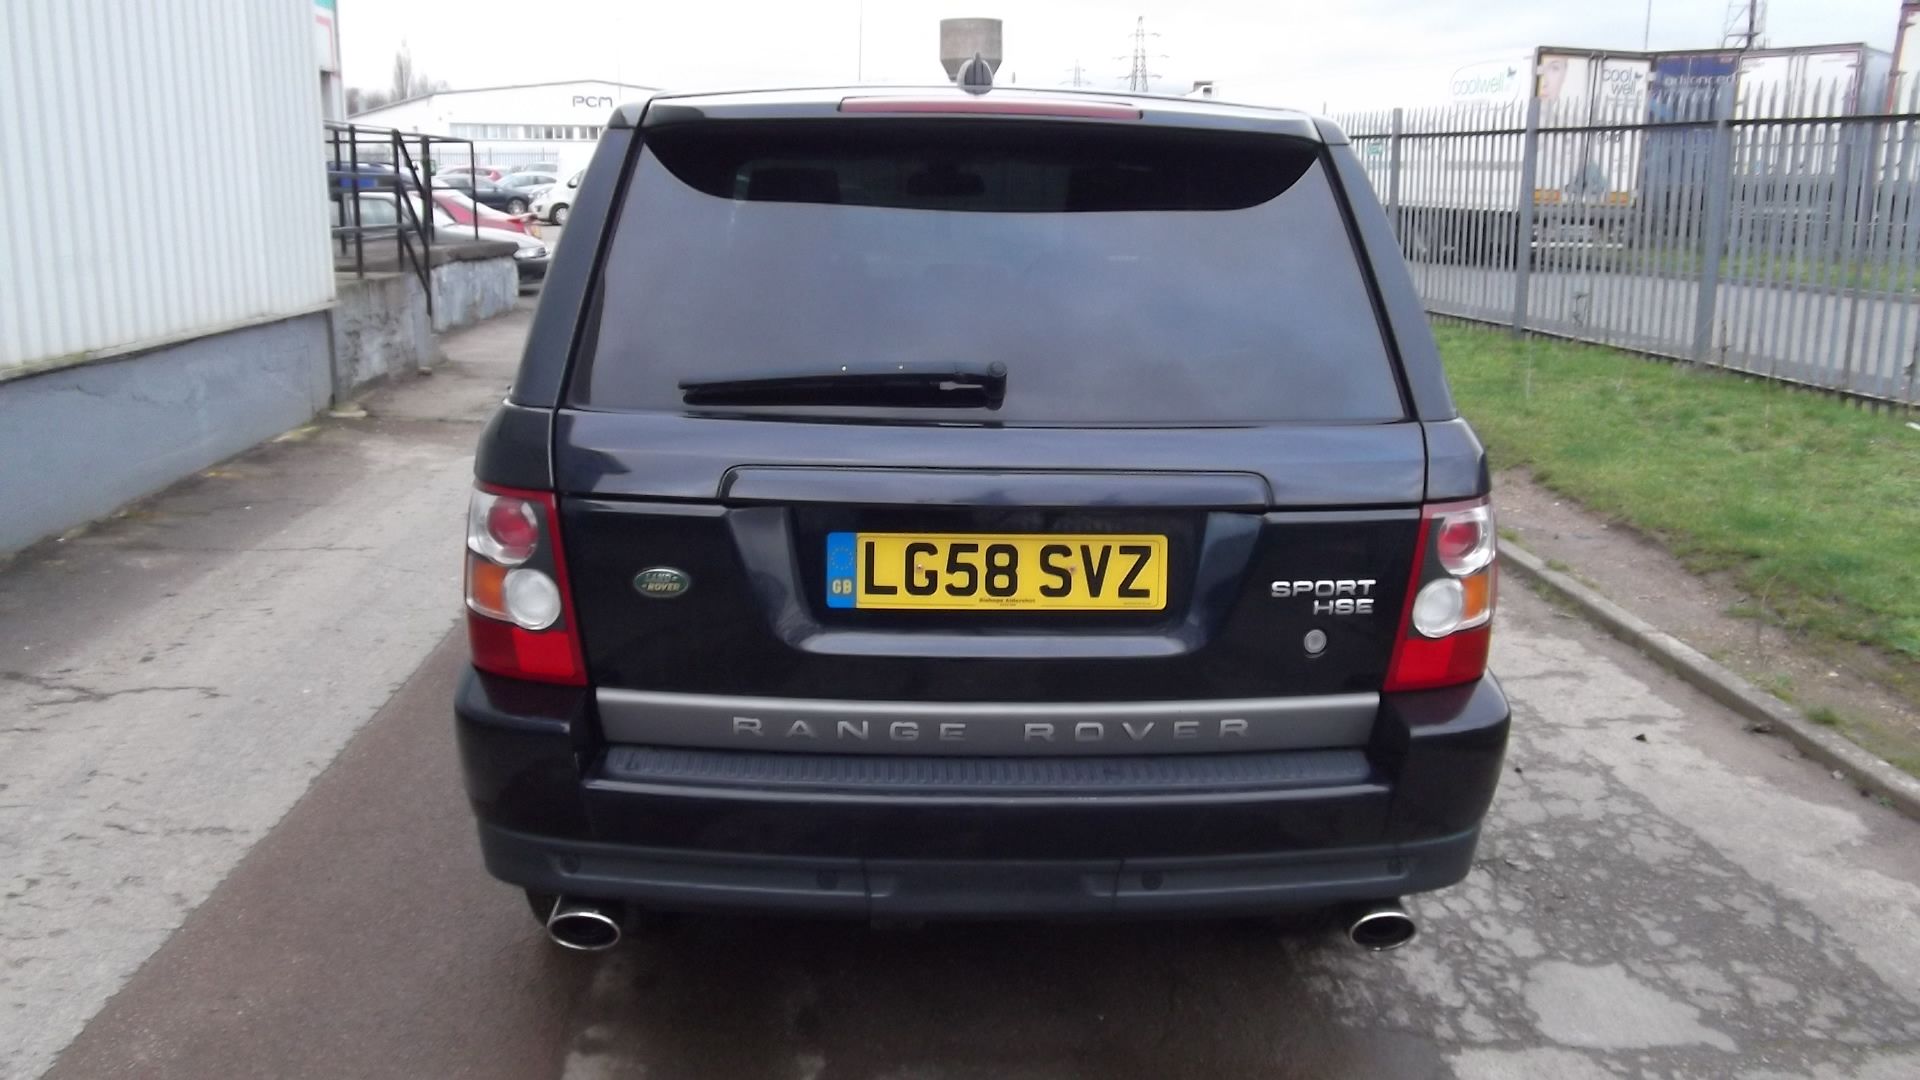 2008 Land Rover Range Rover Sp Hse 2.7 Tdv6 A 5Dr SUV - CL505 - NO VAT ON THE HAMMER - Location: Cor - Image 6 of 15